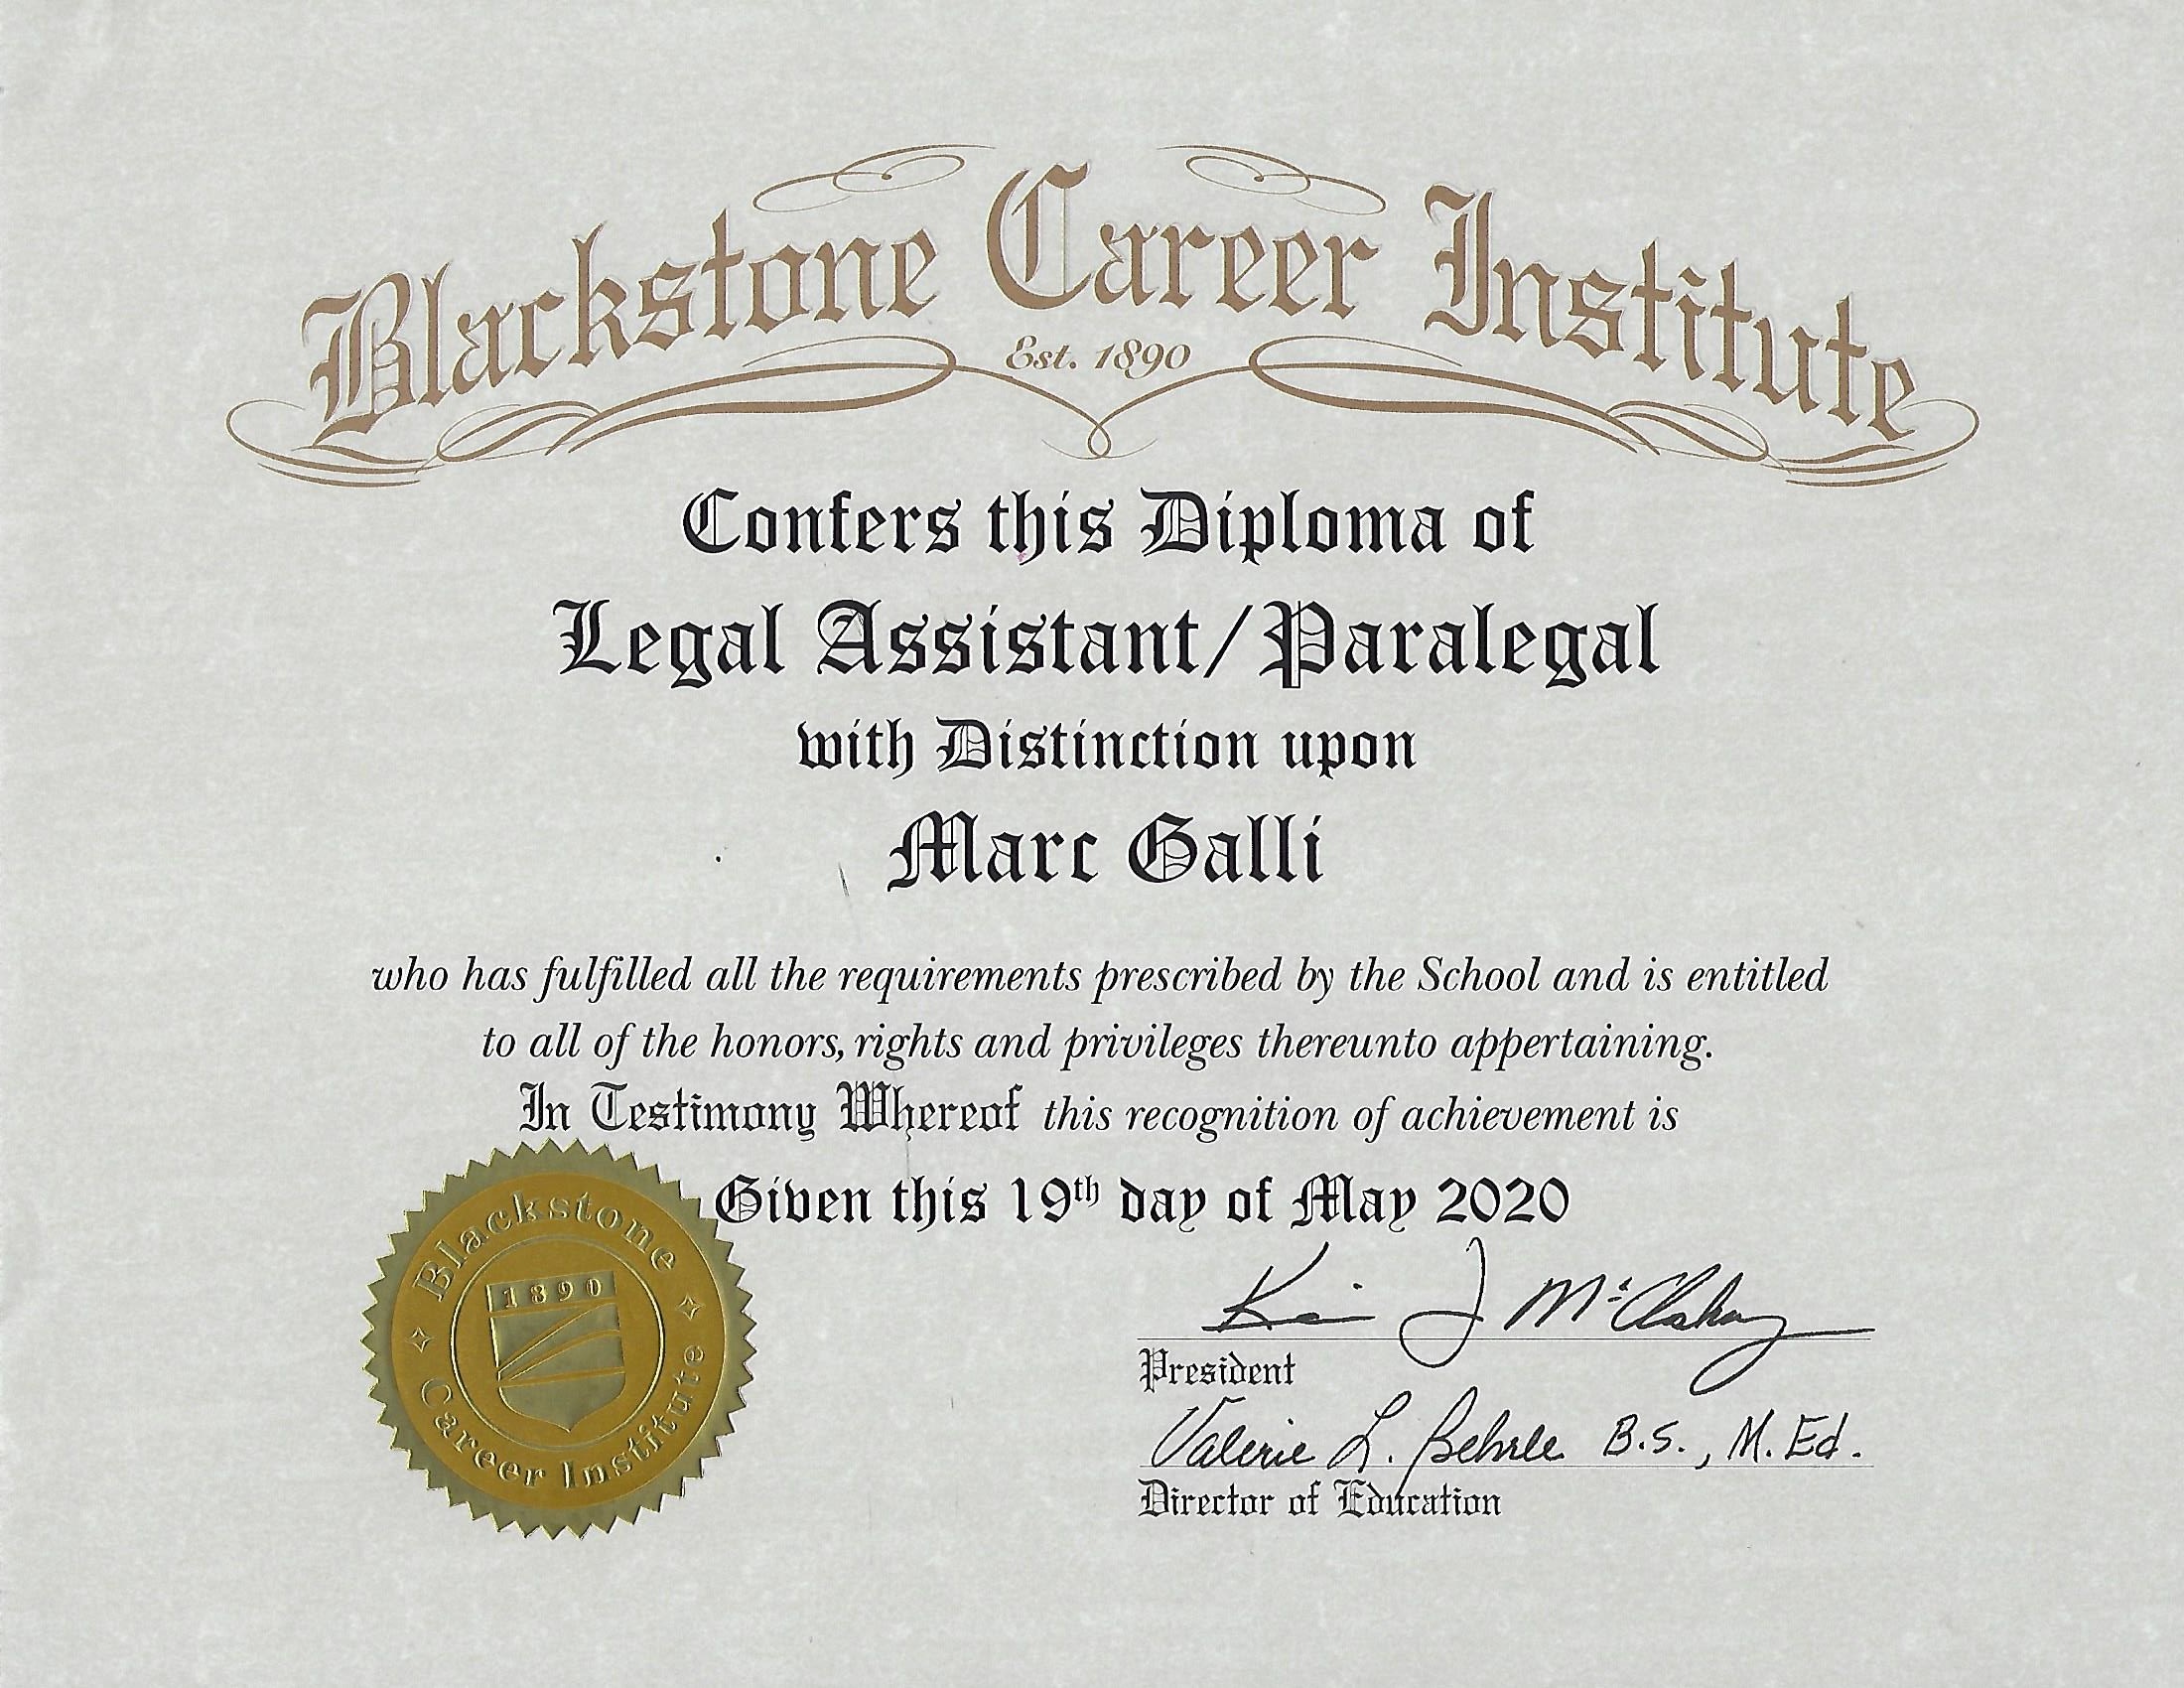 Marc Galli, Certified Paralegal